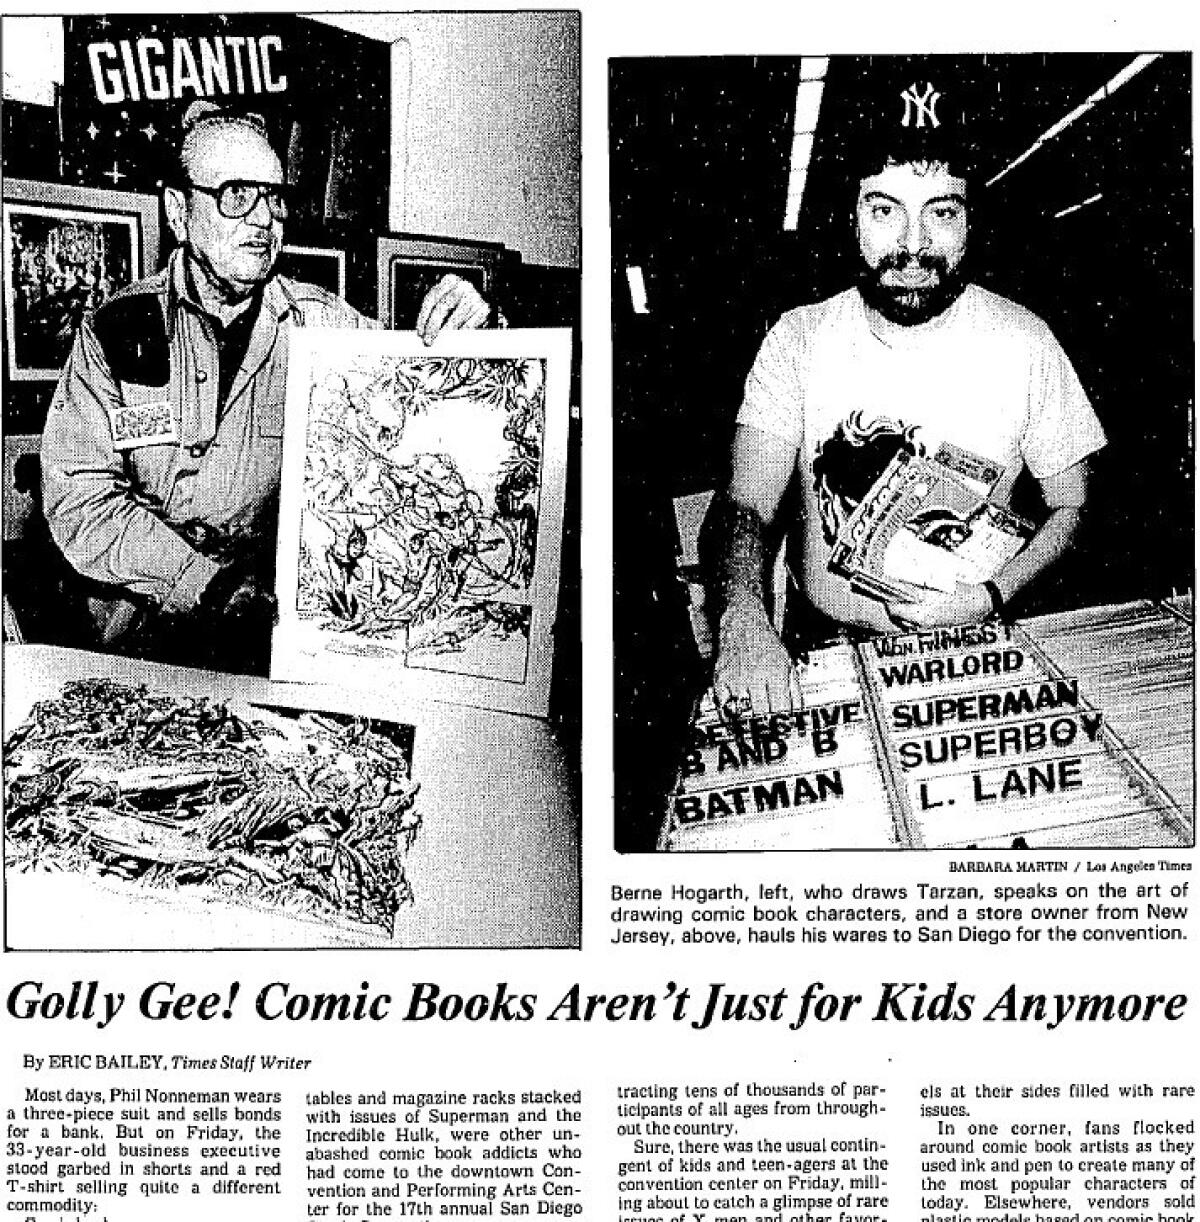 Times staff writer Eric Bailey delves into the subject of comics, art, retail sales and collectors at San Diego Comic-Con on Aug 2, 1986.